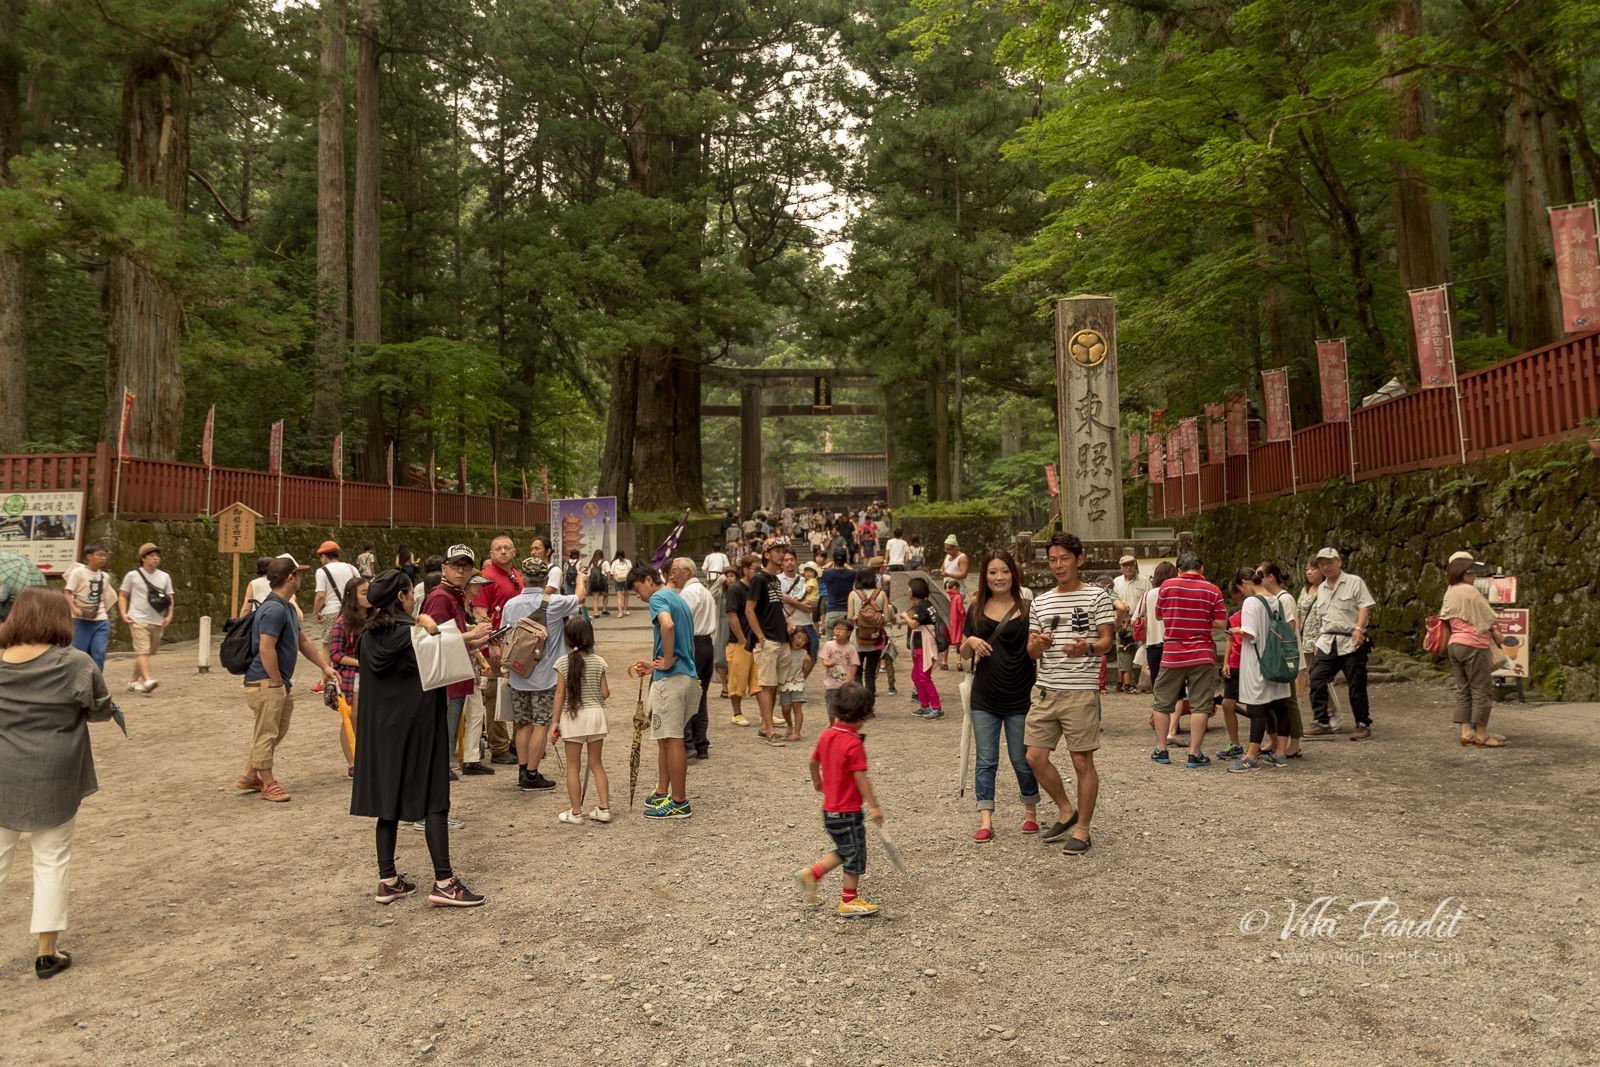 The sacred forest of nikko